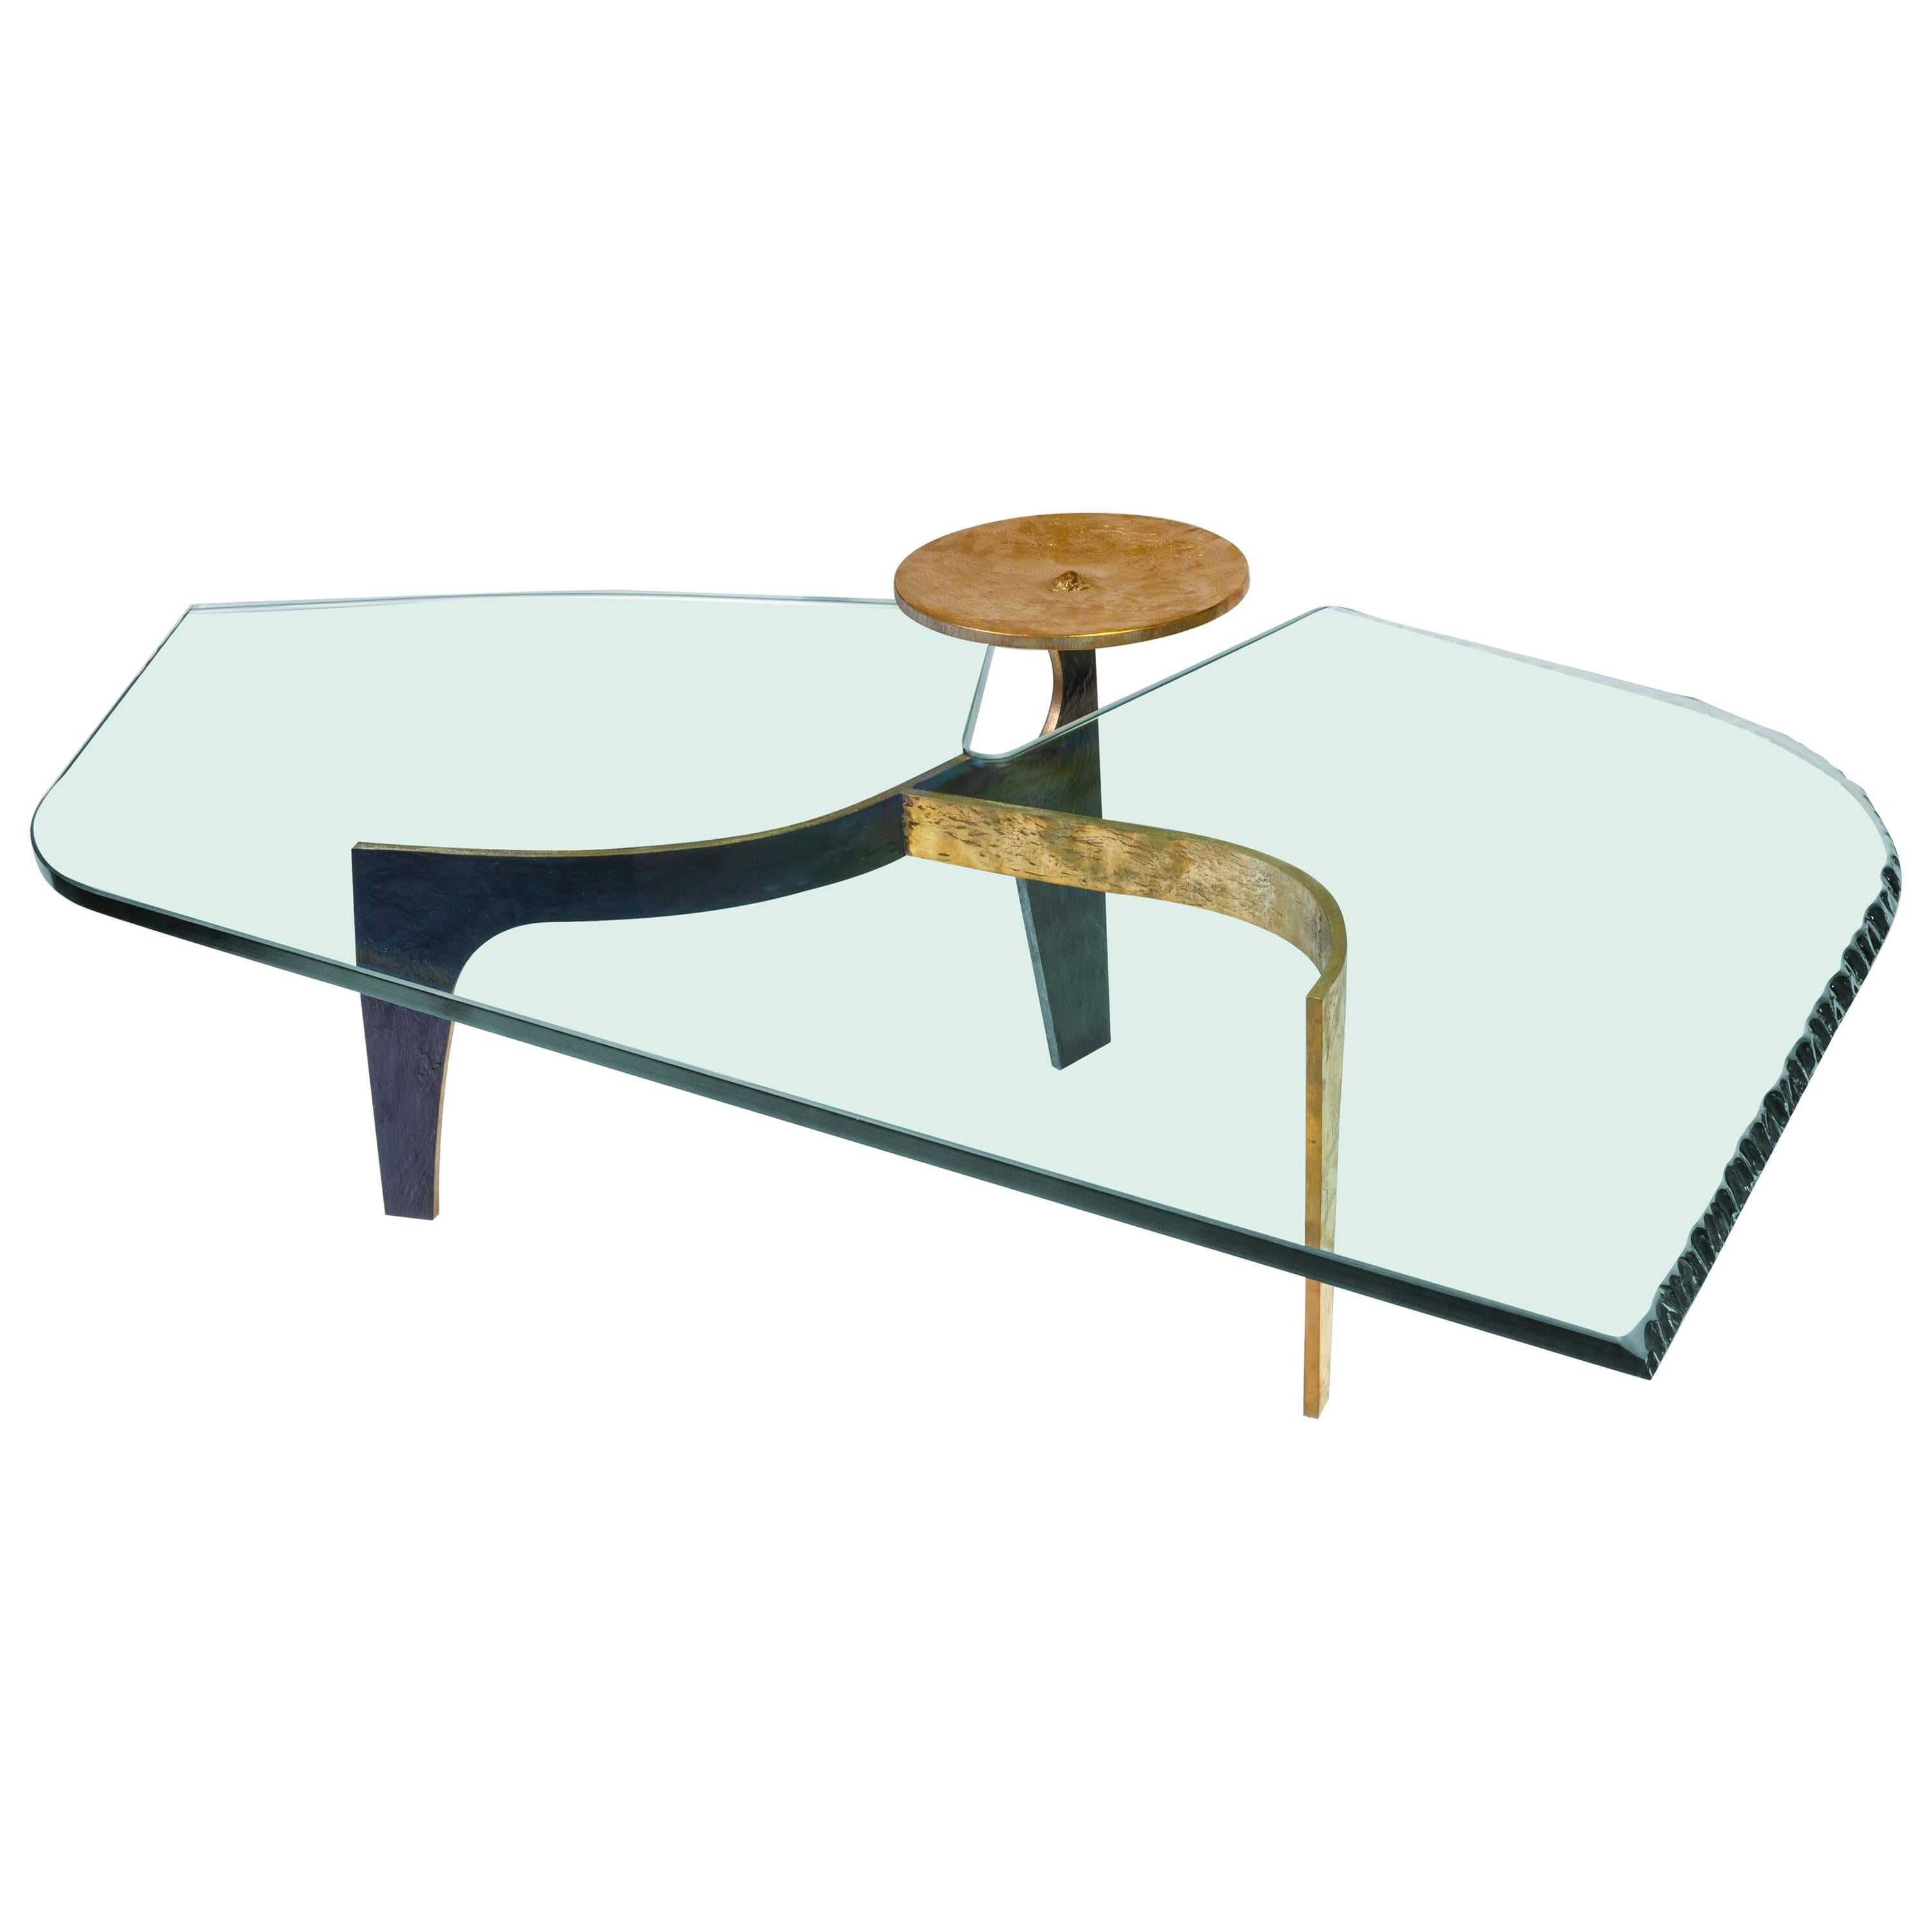 Achille Salvagni "Ares" Coffee Table, Bronze Structure and Glass, Contemporary